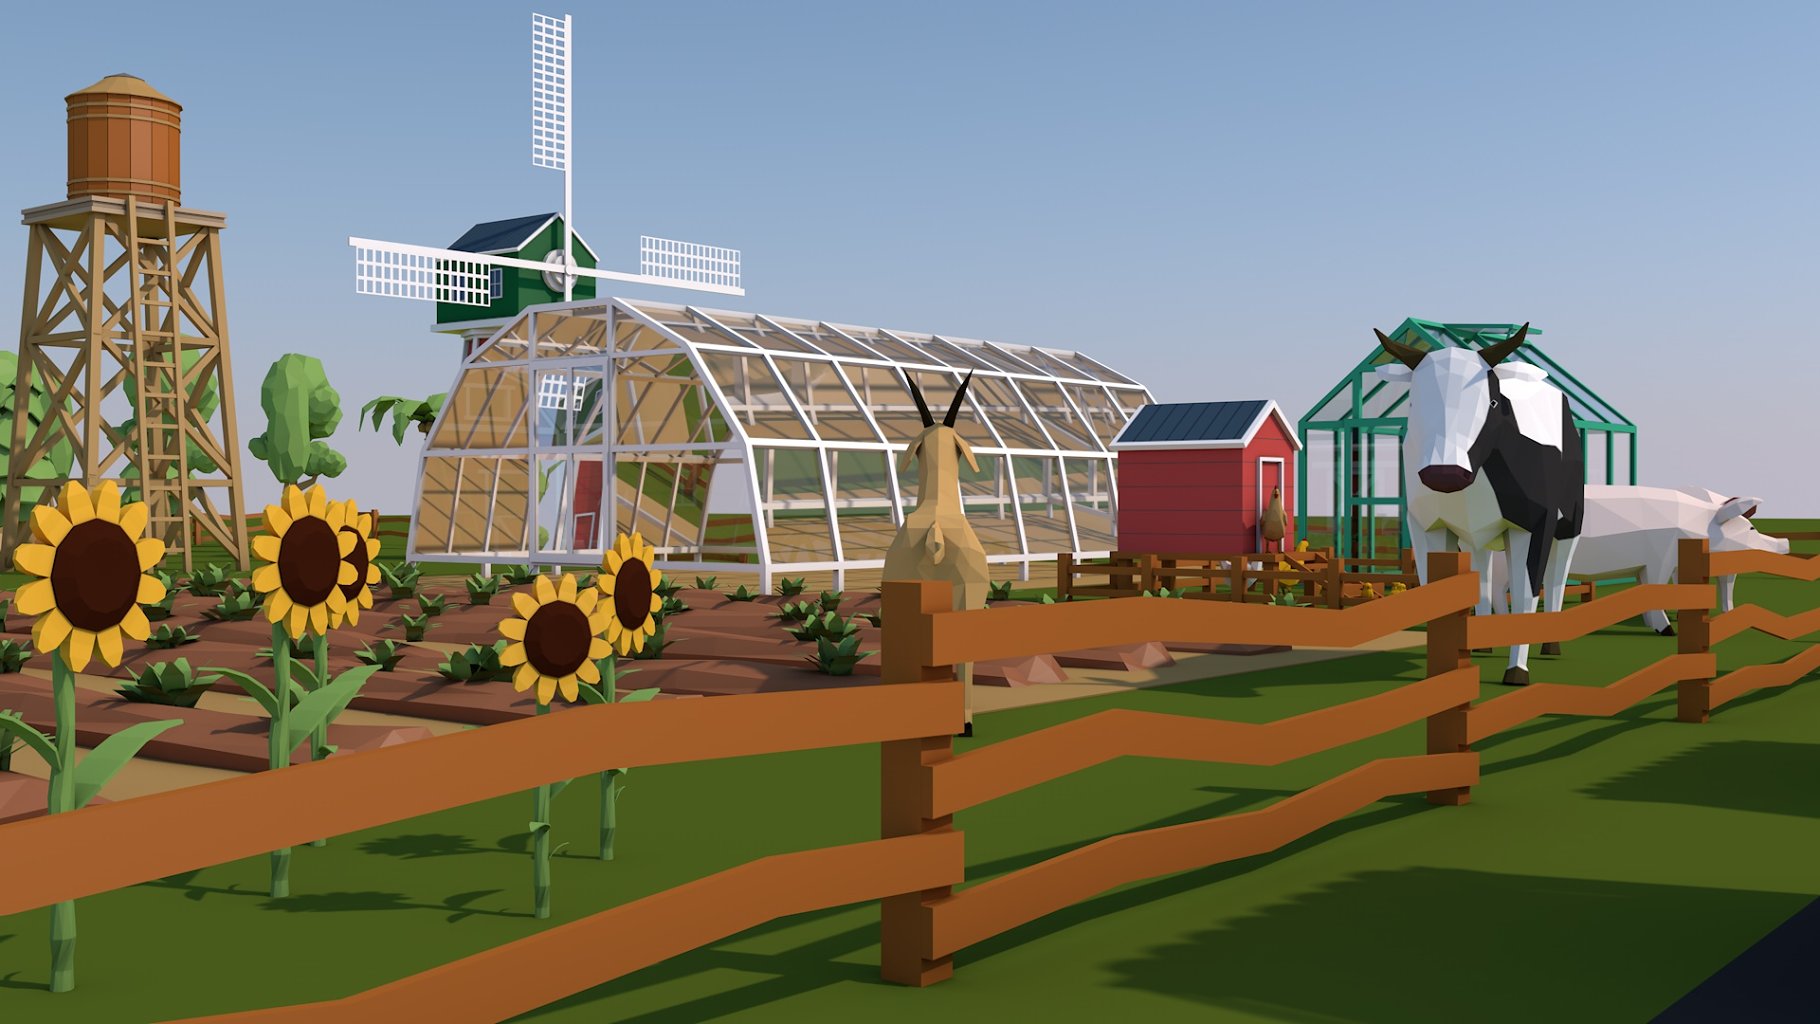 A wooden greenhouse and a windmill.